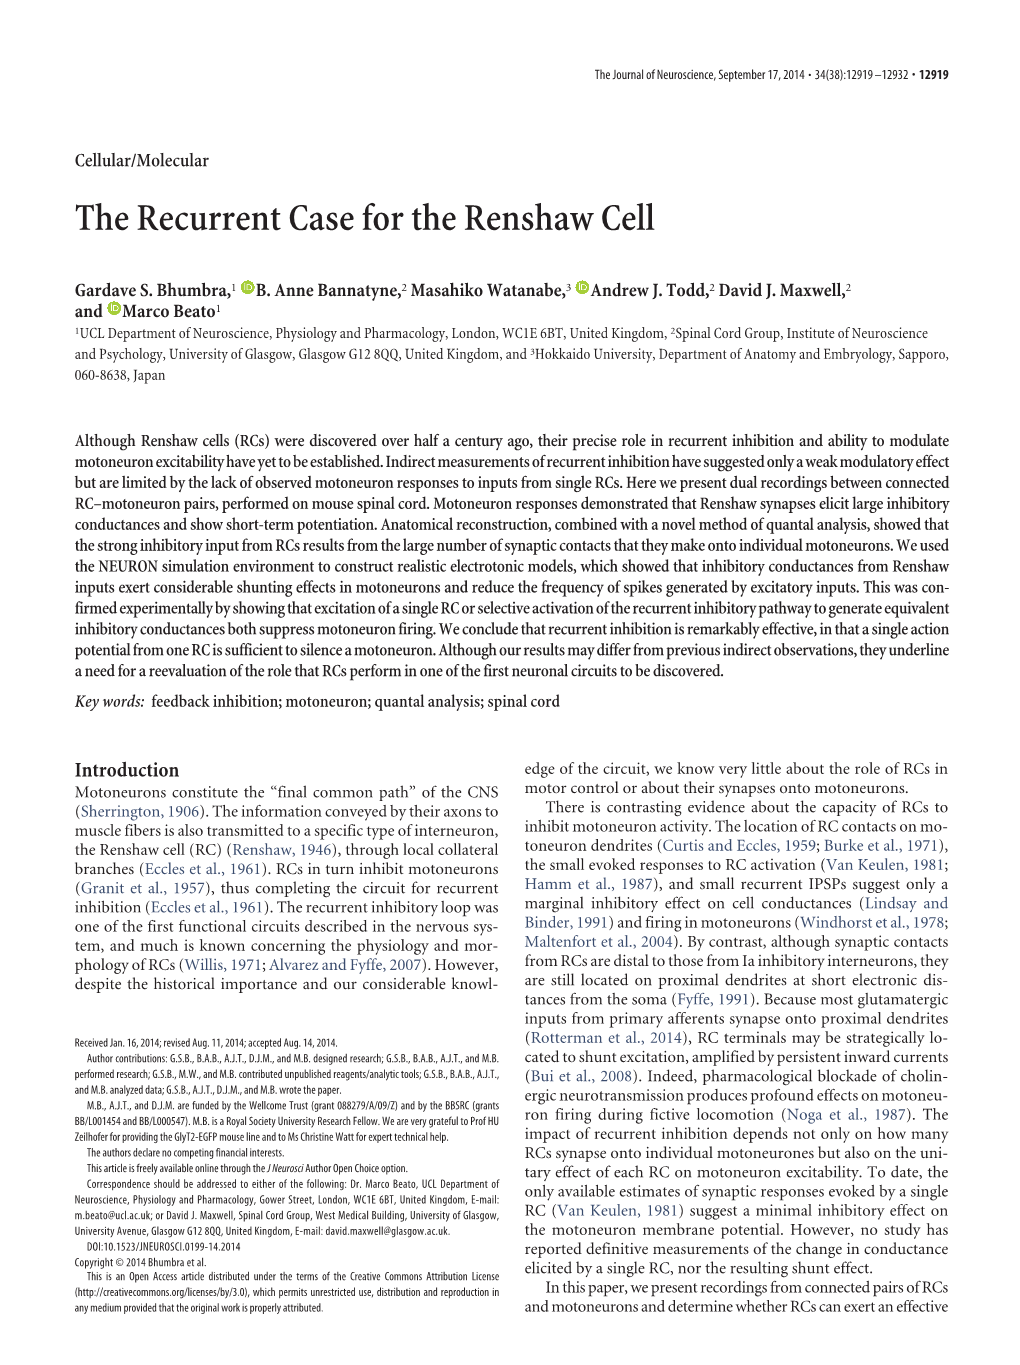 The Recurrent Case for the Renshaw Cell